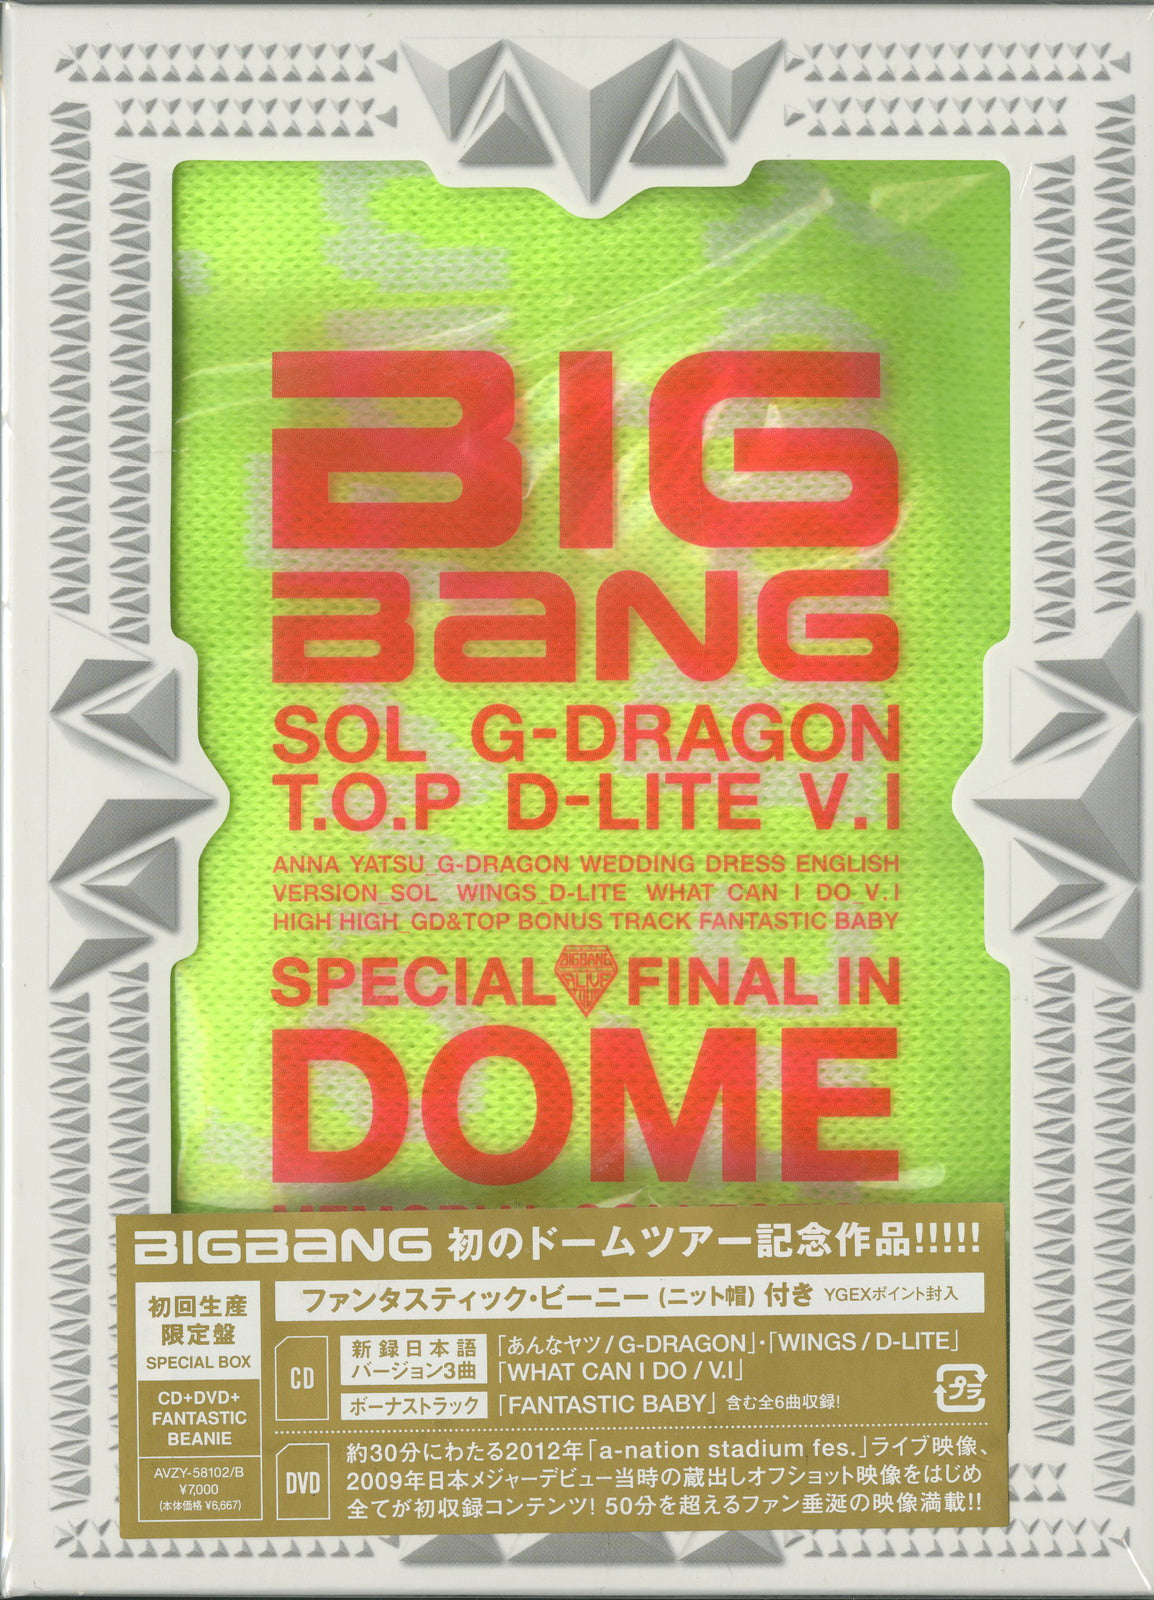 Bigbang - Special Final In Dome Memorial Collection - Japan CD+